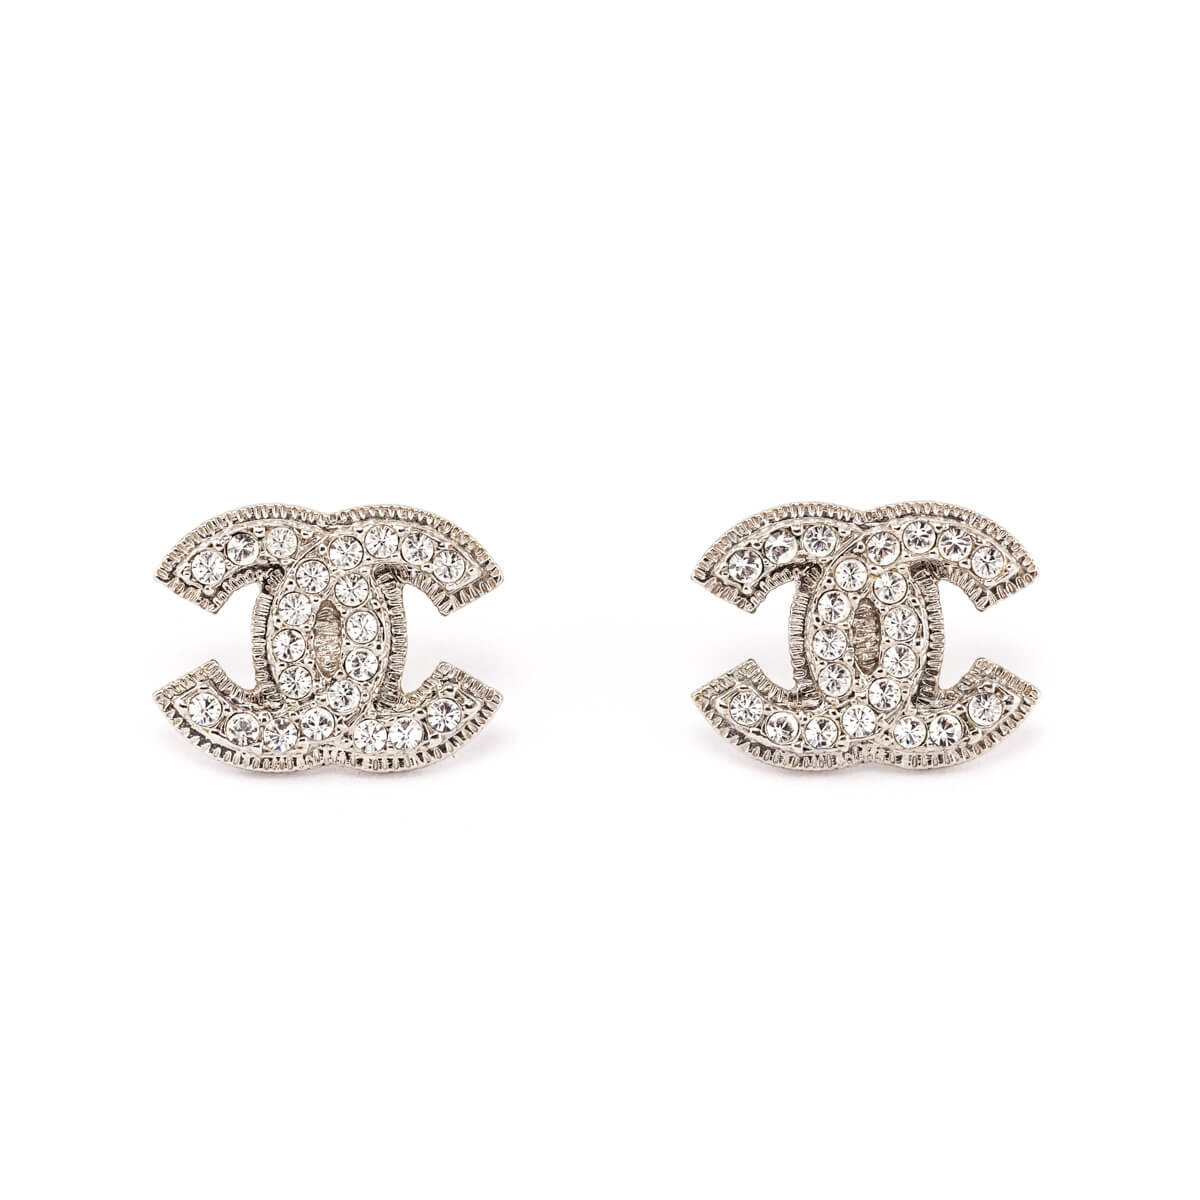 Chanel Silver Strass CC Stud Earrings - Preowned Chanel Jewelry